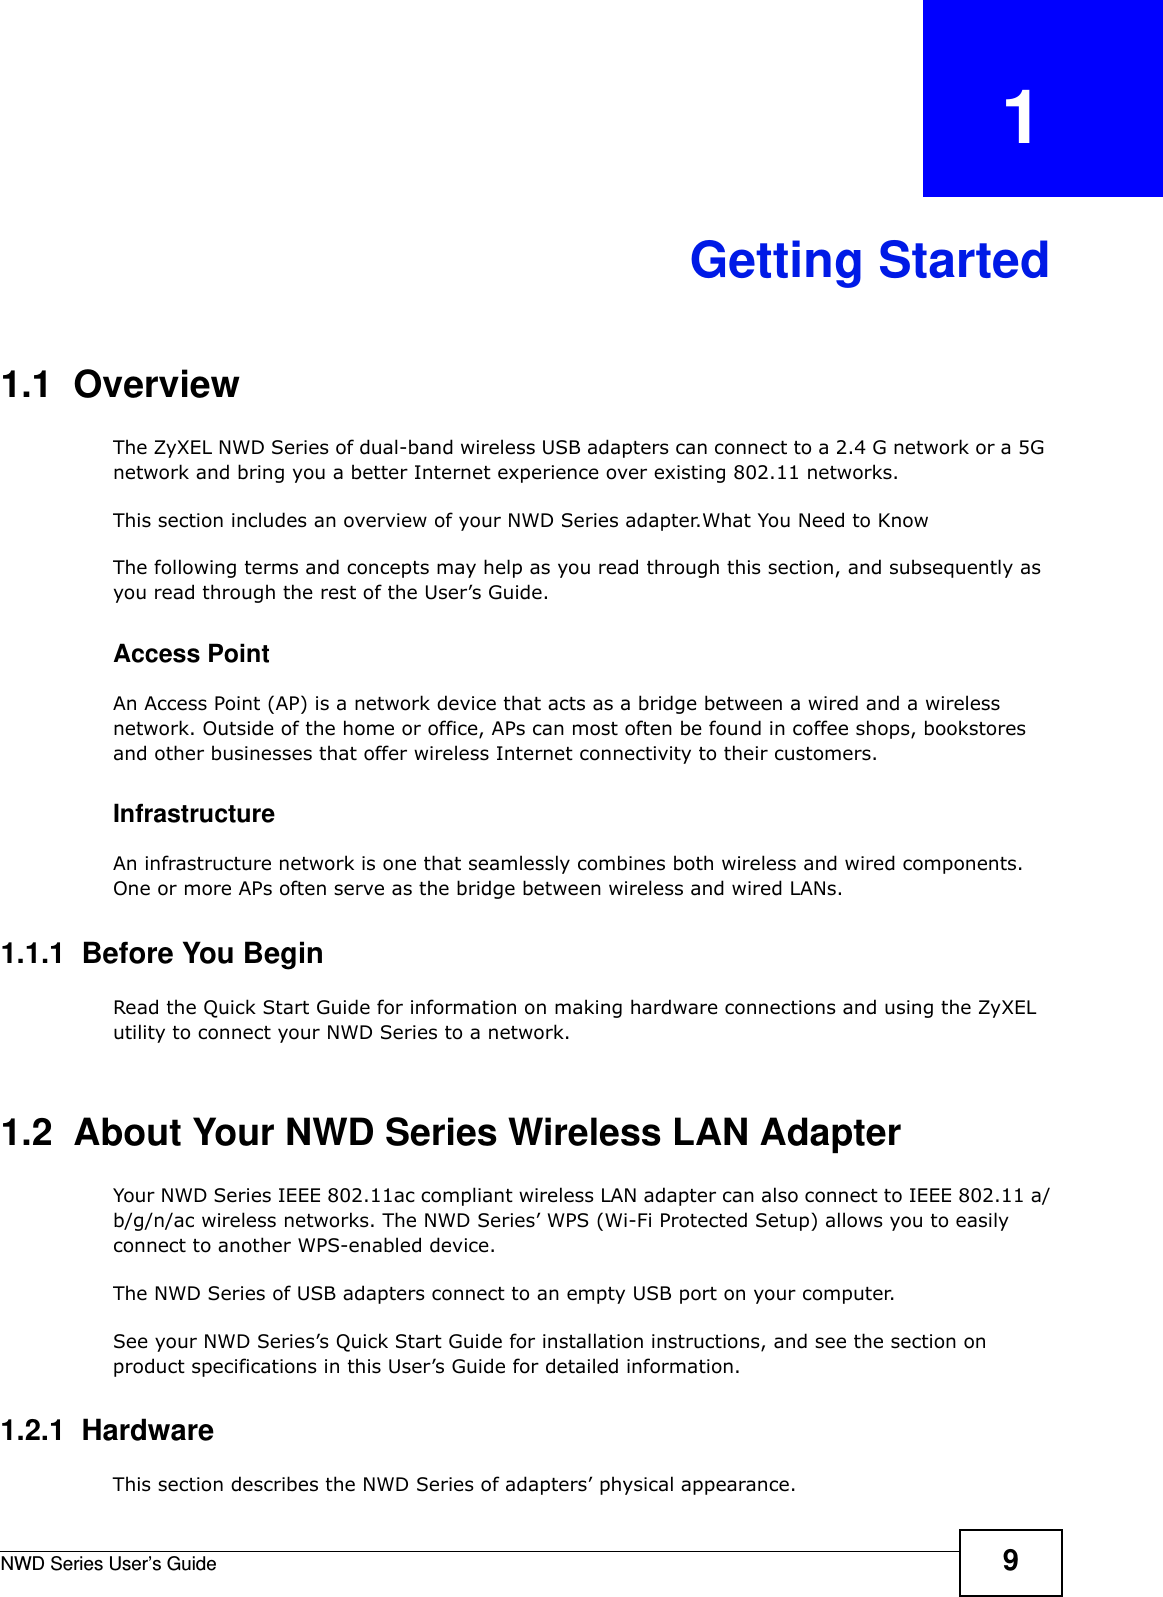 NWD Series User’s Guide 9CHAPTER   1Getting Started1.1  OverviewThe ZyXEL NWD Series of dual-band wireless USB adapters can connect to a 2.4 G network or a 5G network and bring you a better Internet experience over existing 802.11 networks.This section includes an overview of your NWD Series adapter.What You Need to KnowThe following terms and concepts may help as you read through this section, and subsequently as you read through the rest of the User’s Guide.Access PointAn Access Point (AP) is a network device that acts as a bridge between a wired and a wireless network. Outside of the home or office, APs can most often be found in coffee shops, bookstores and other businesses that offer wireless Internet connectivity to their customers.InfrastructureAn infrastructure network is one that seamlessly combines both wireless and wired components. One or more APs often serve as the bridge between wireless and wired LANs.1.1.1  Before You BeginRead the Quick Start Guide for information on making hardware connections and using the ZyXEL utility to connect your NWD Series to a network.1.2  About Your NWD Series Wireless LAN Adapter    Your NWD Series IEEE 802.11ac compliant wireless LAN adapter can also connect to IEEE 802.11 a/b/g/n/ac wireless networks. The NWD Series’ WPS (Wi-Fi Protected Setup) allows you to easily connect to another WPS-enabled device. The NWD Series of USB adapters connect to an empty USB port on your computer.See your NWD Series’s Quick Start Guide for installation instructions, and see the section on product specifications in this User’s Guide for detailed information.1.2.1  HardwareThis section describes the NWD Series of adapters’ physical appearance.